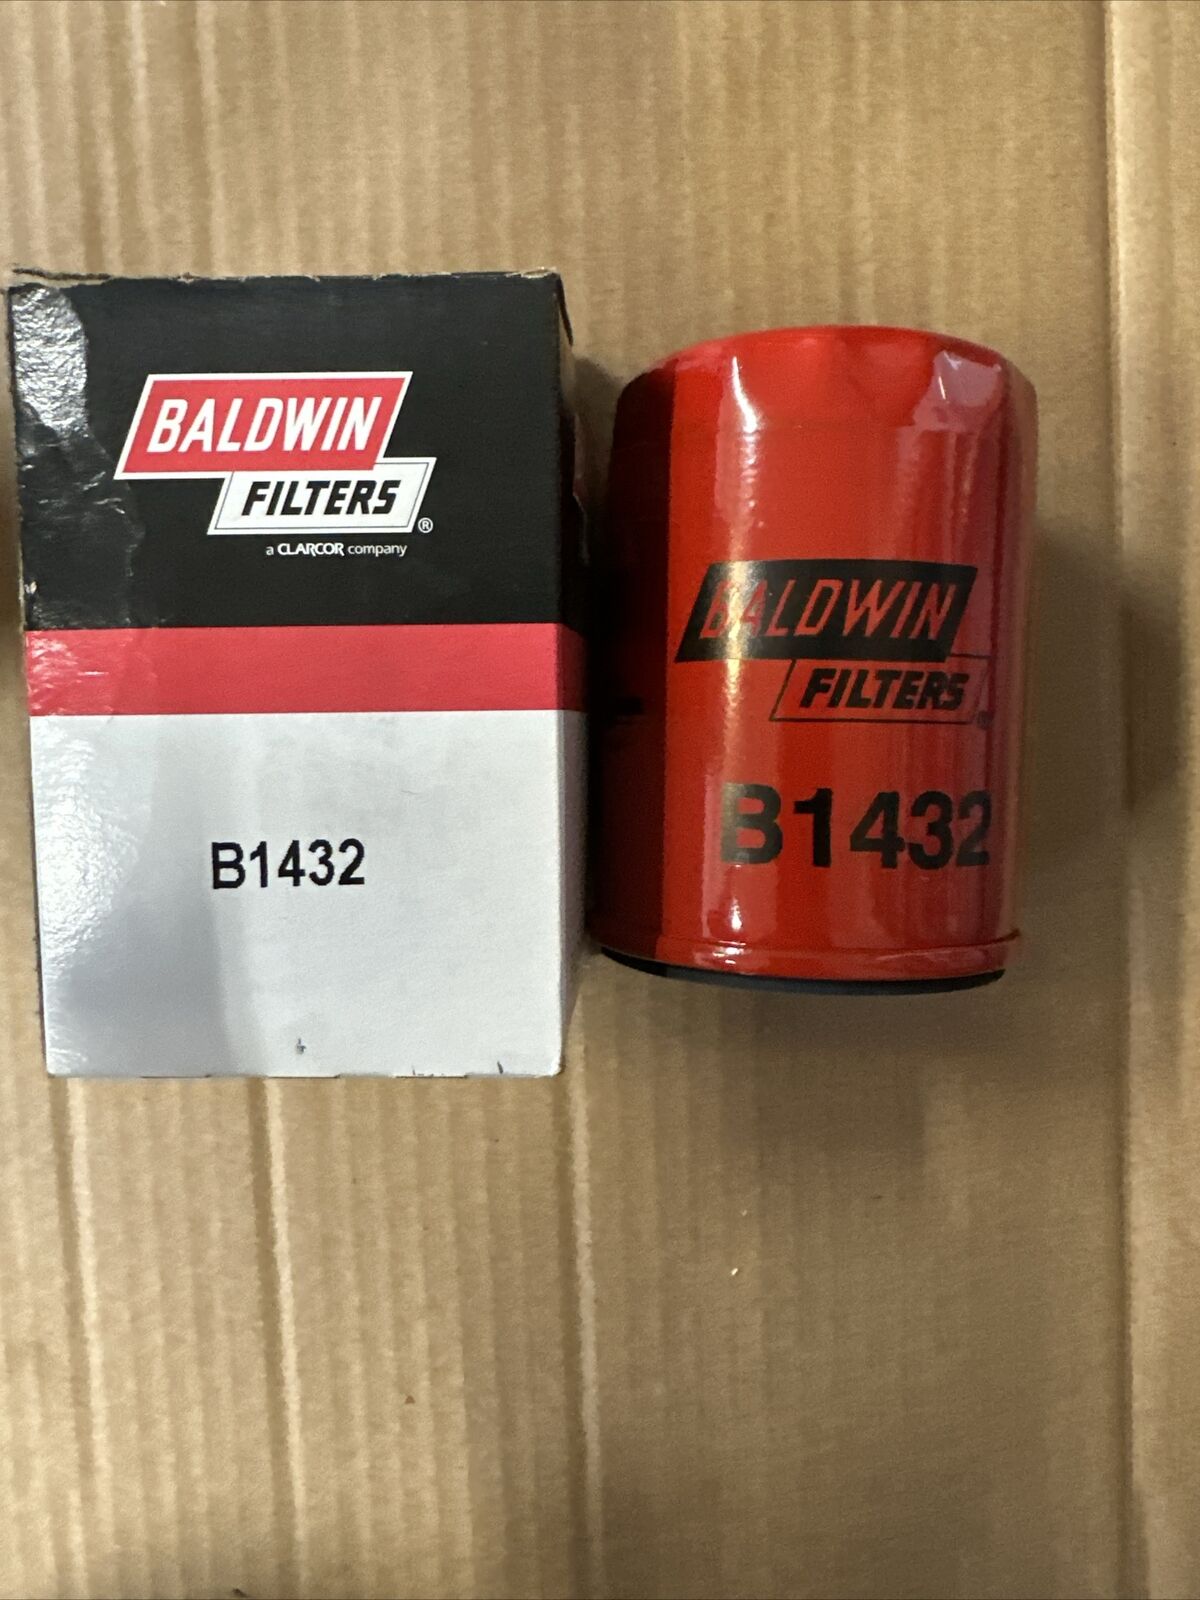 New BALDWIN FILTERS B1432 Oil Filter, Spin-On, 4-3/32